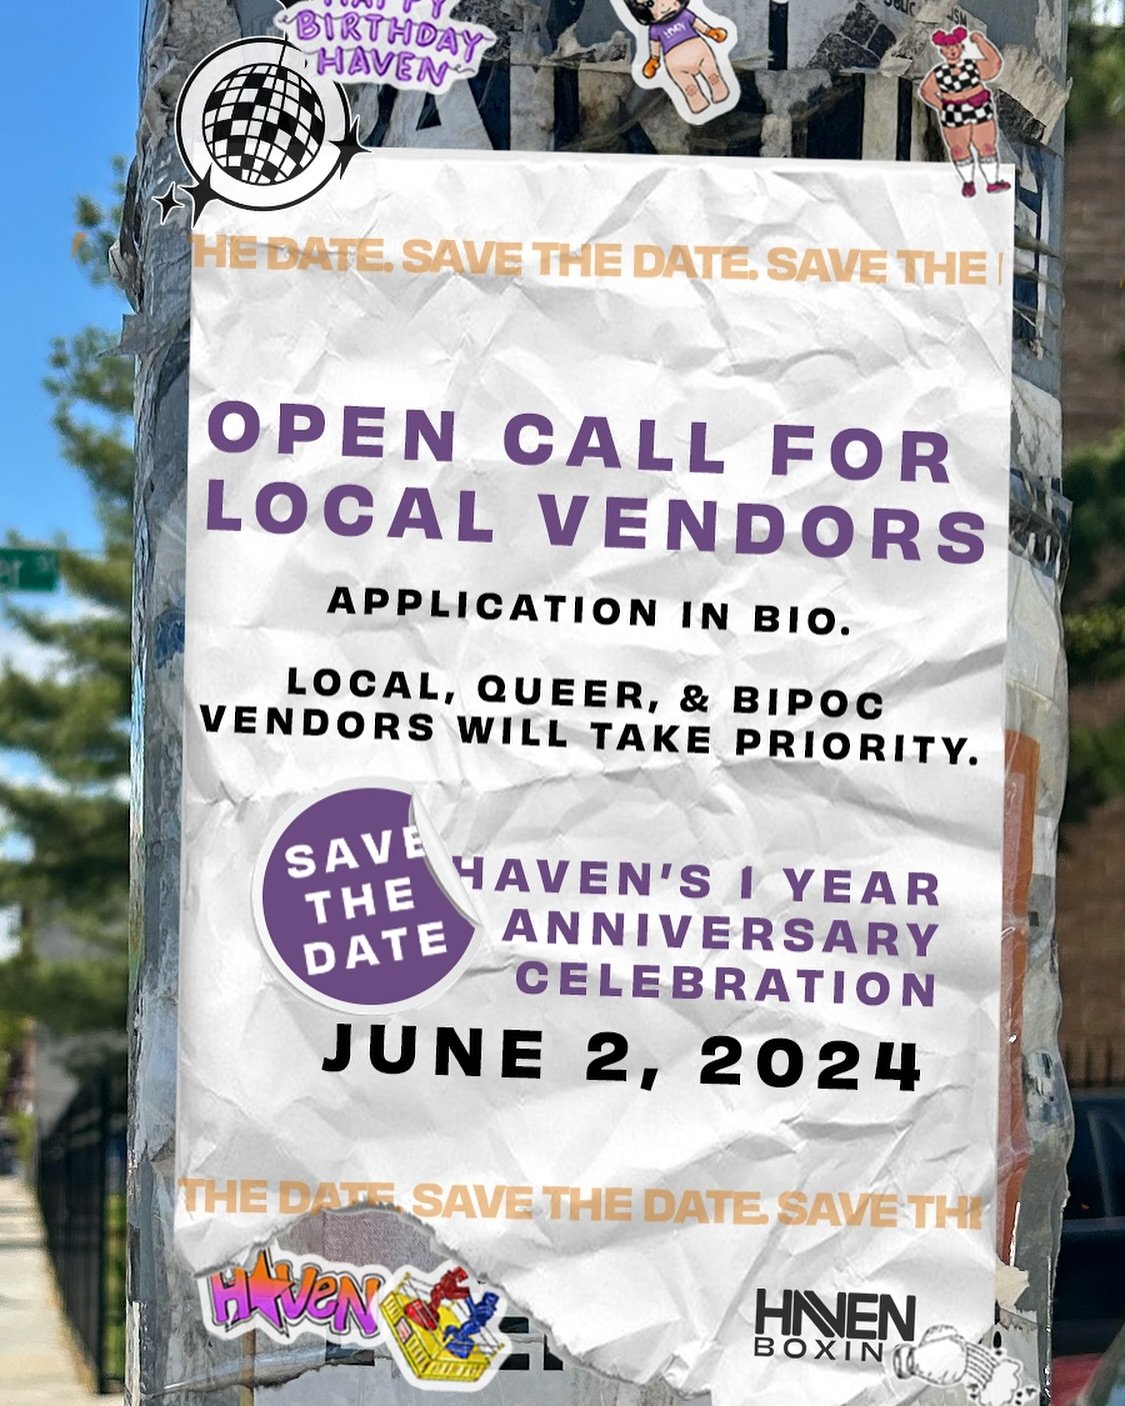 💜 SAVE THE DATE 💜

HAVEN is turning ONE!! 🎈We have some big things in store to celebrate, but in the meantime mark your calendars for a very special anniversary event on June 2! 

We&rsquo;ll be sharing details shortly but in the meantime if you o